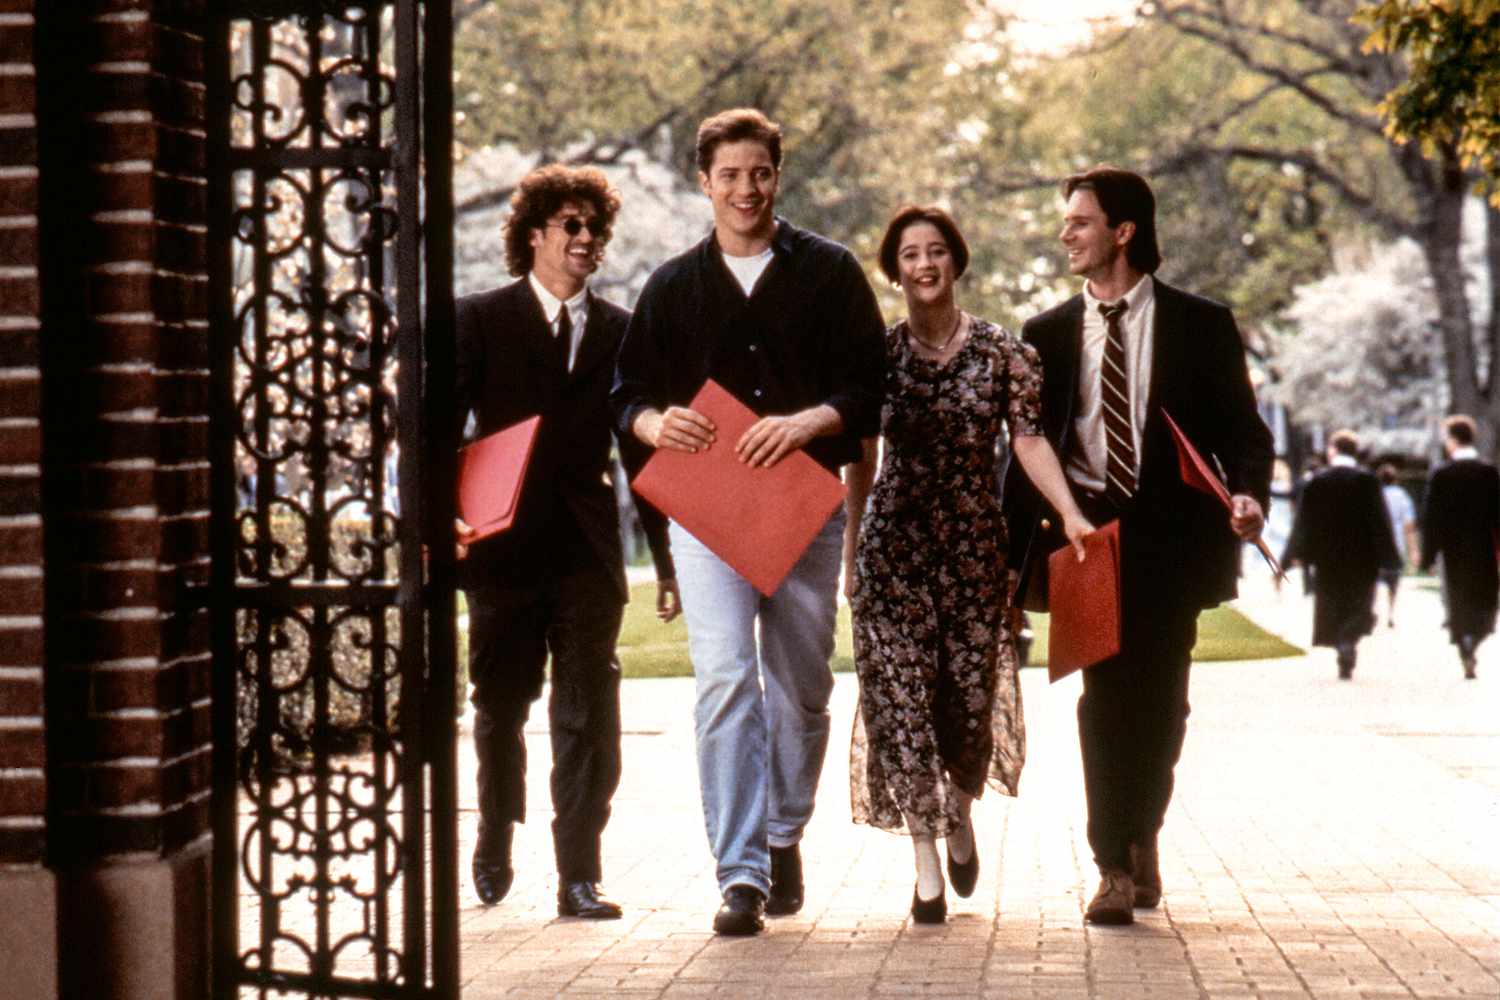 Patrick Dempsey, Brendan Fraser, Moira Kelly, and Josh Hamilton in 'With Honors'